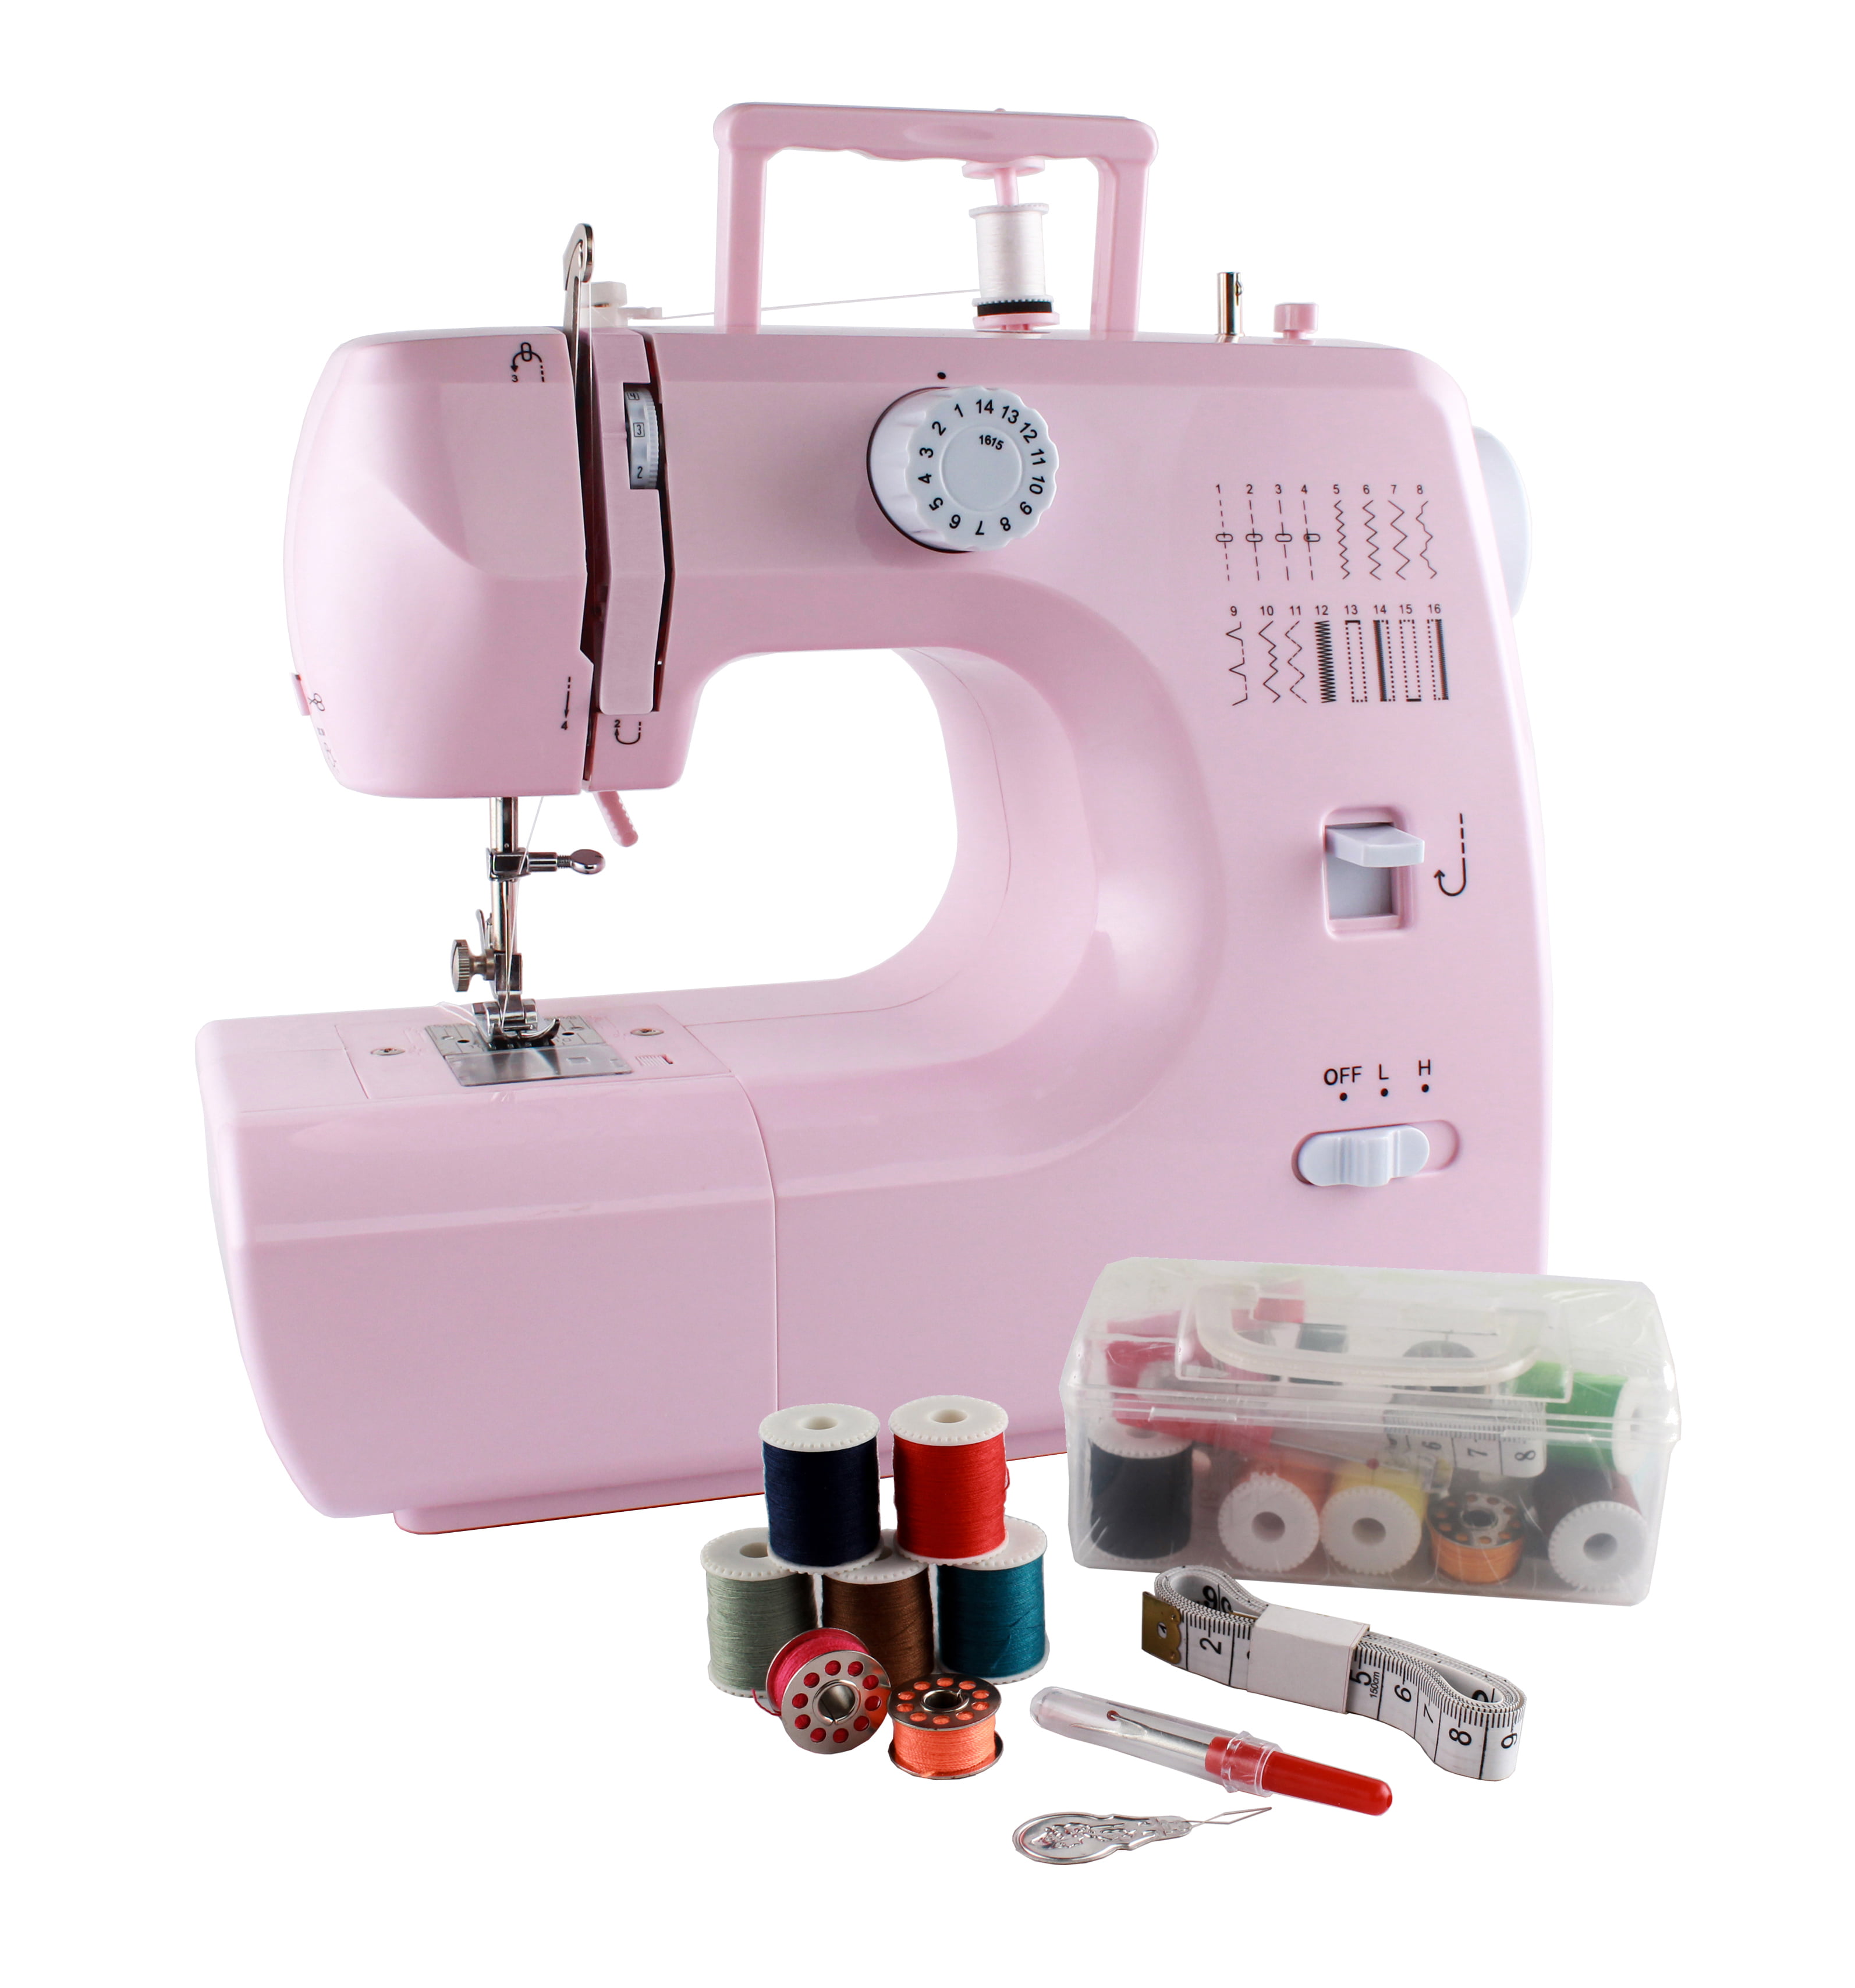 Michley Inspiration 700p 16-Stitch Sewing Machine (Barely Pink) with Sewing  Kit